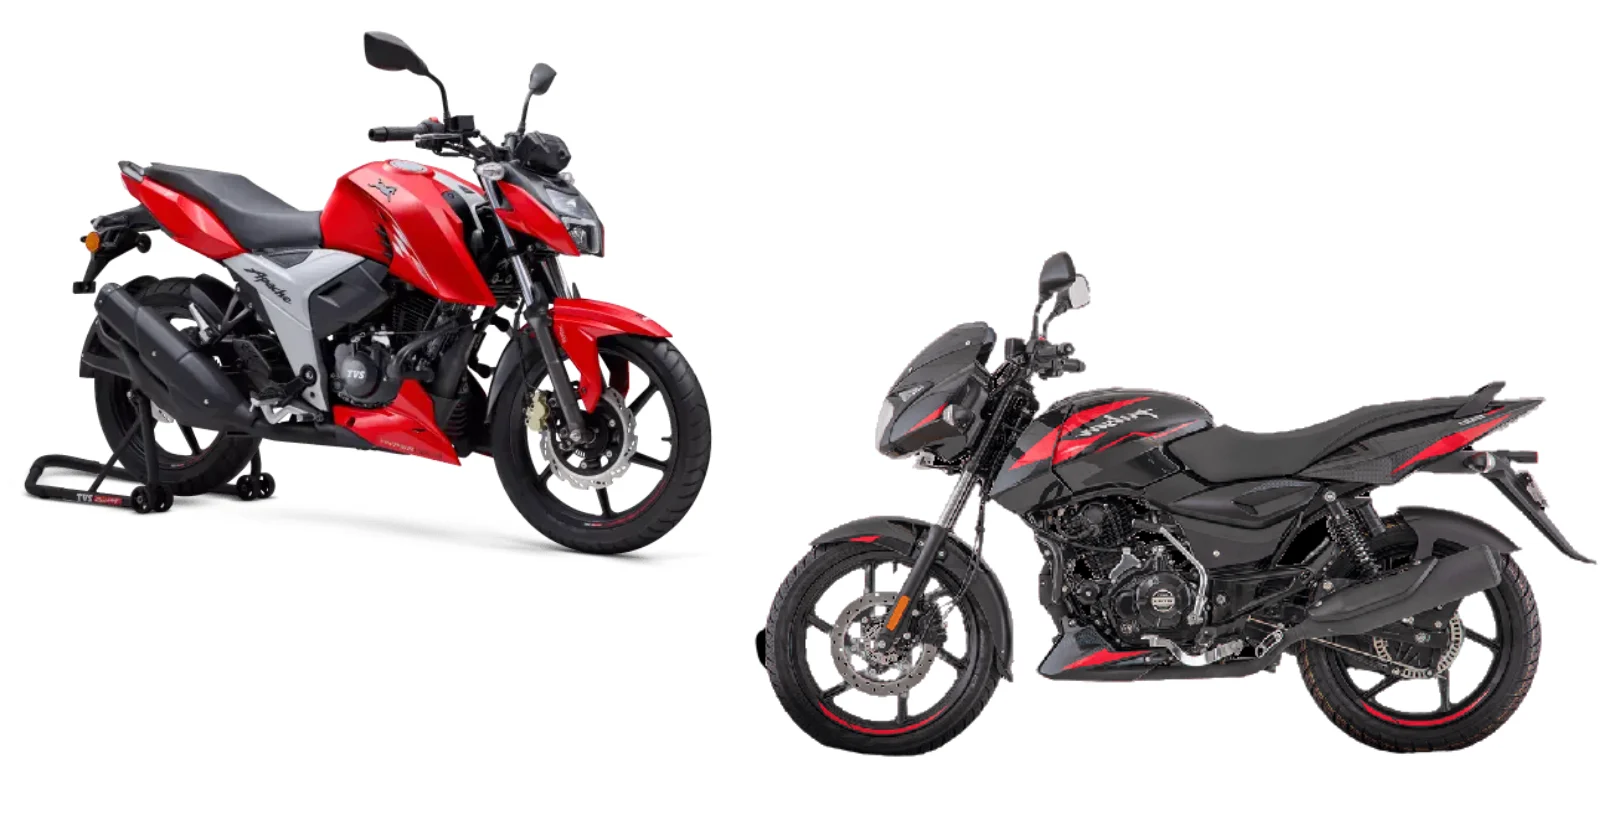 Pulsar 150 vs Apache 160: Compare prices, Specs, and Features